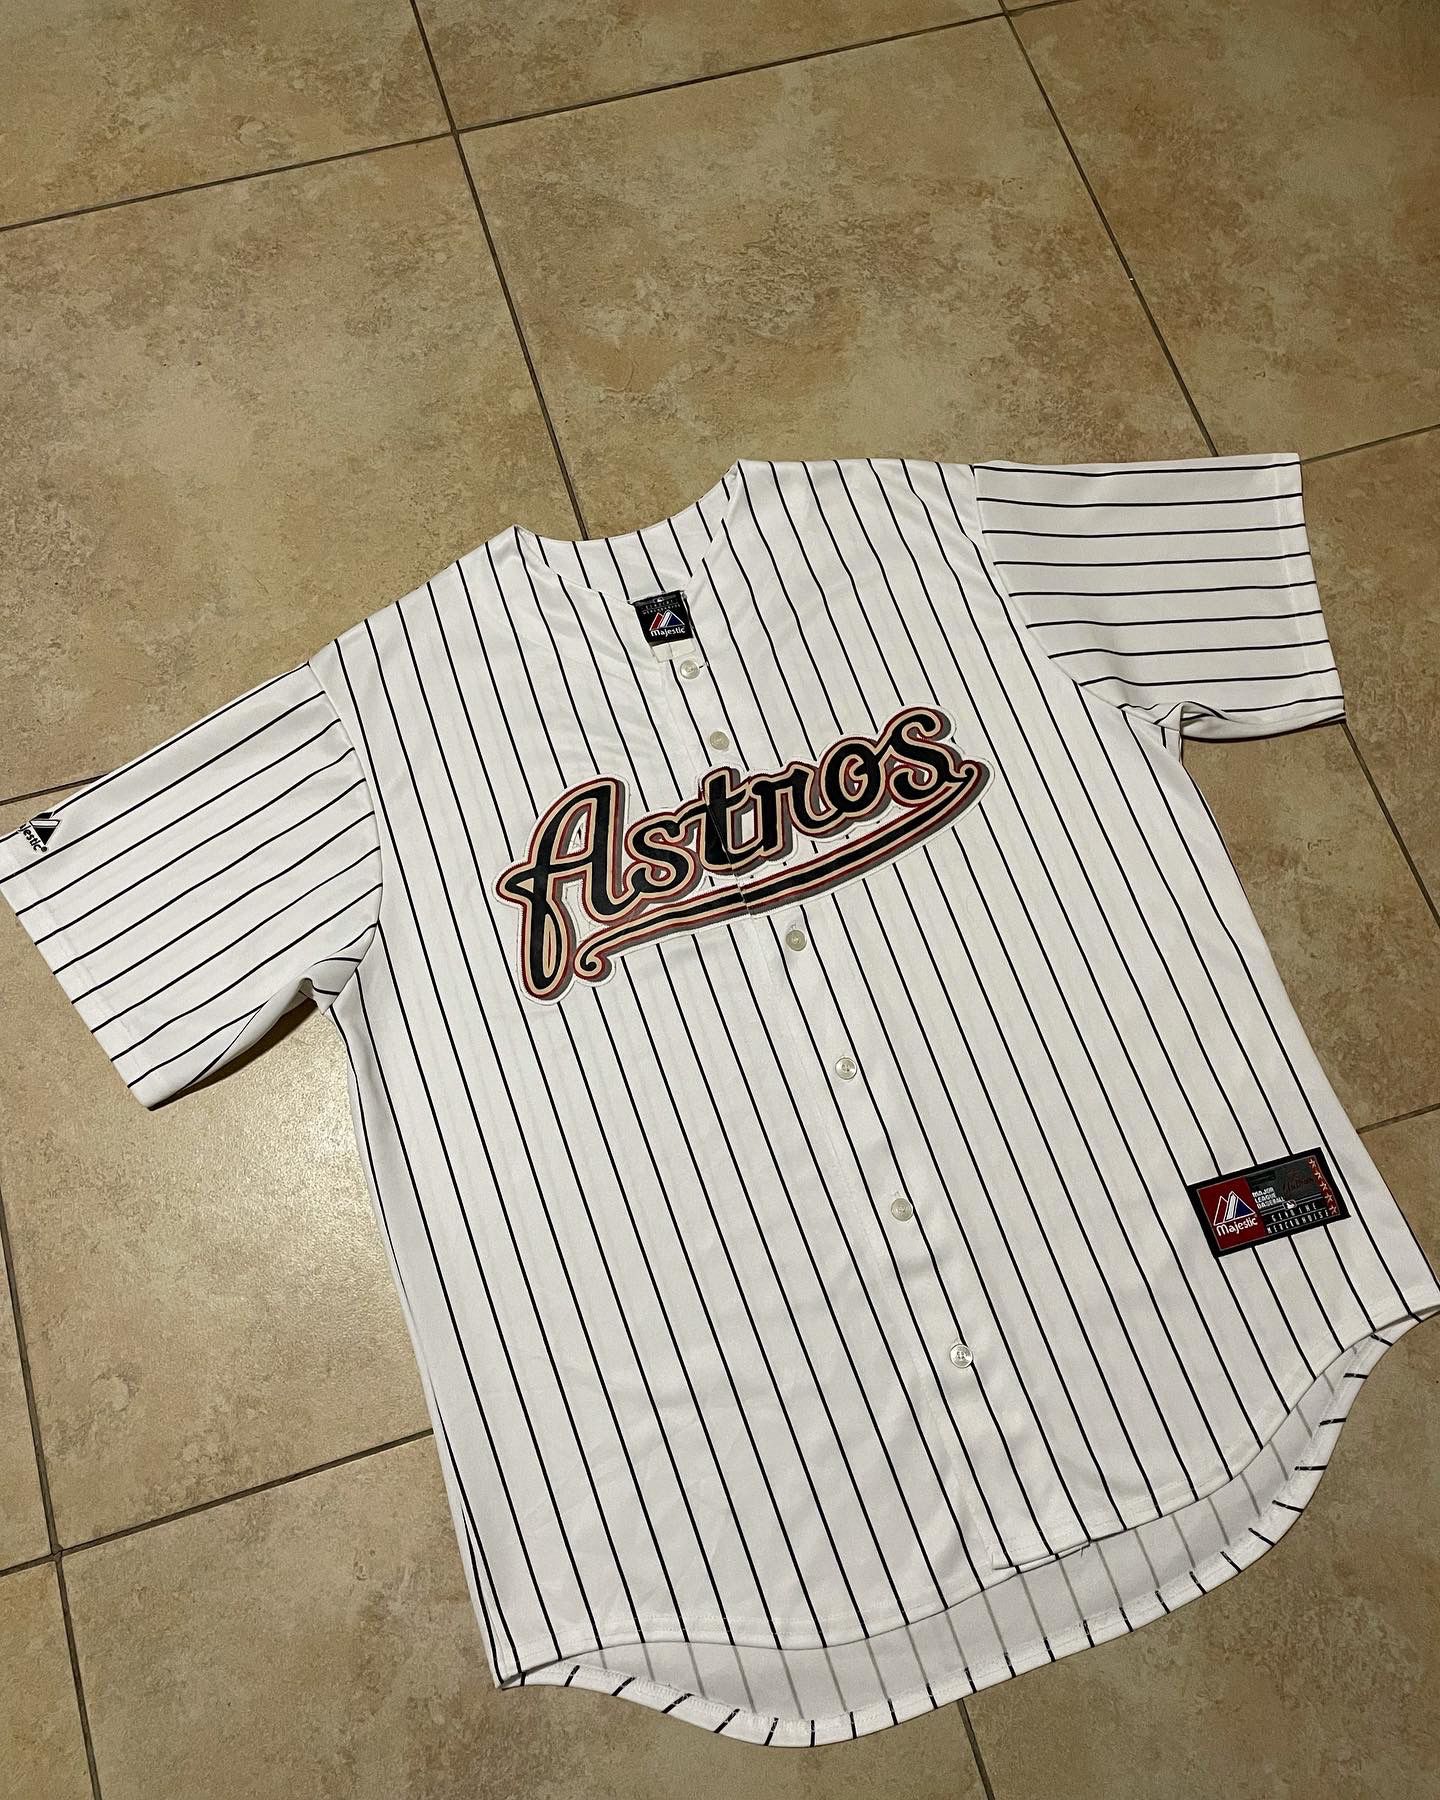 Tommy Bahama Baseball Astros Shirt for Sale in Garland, TX - OfferUp